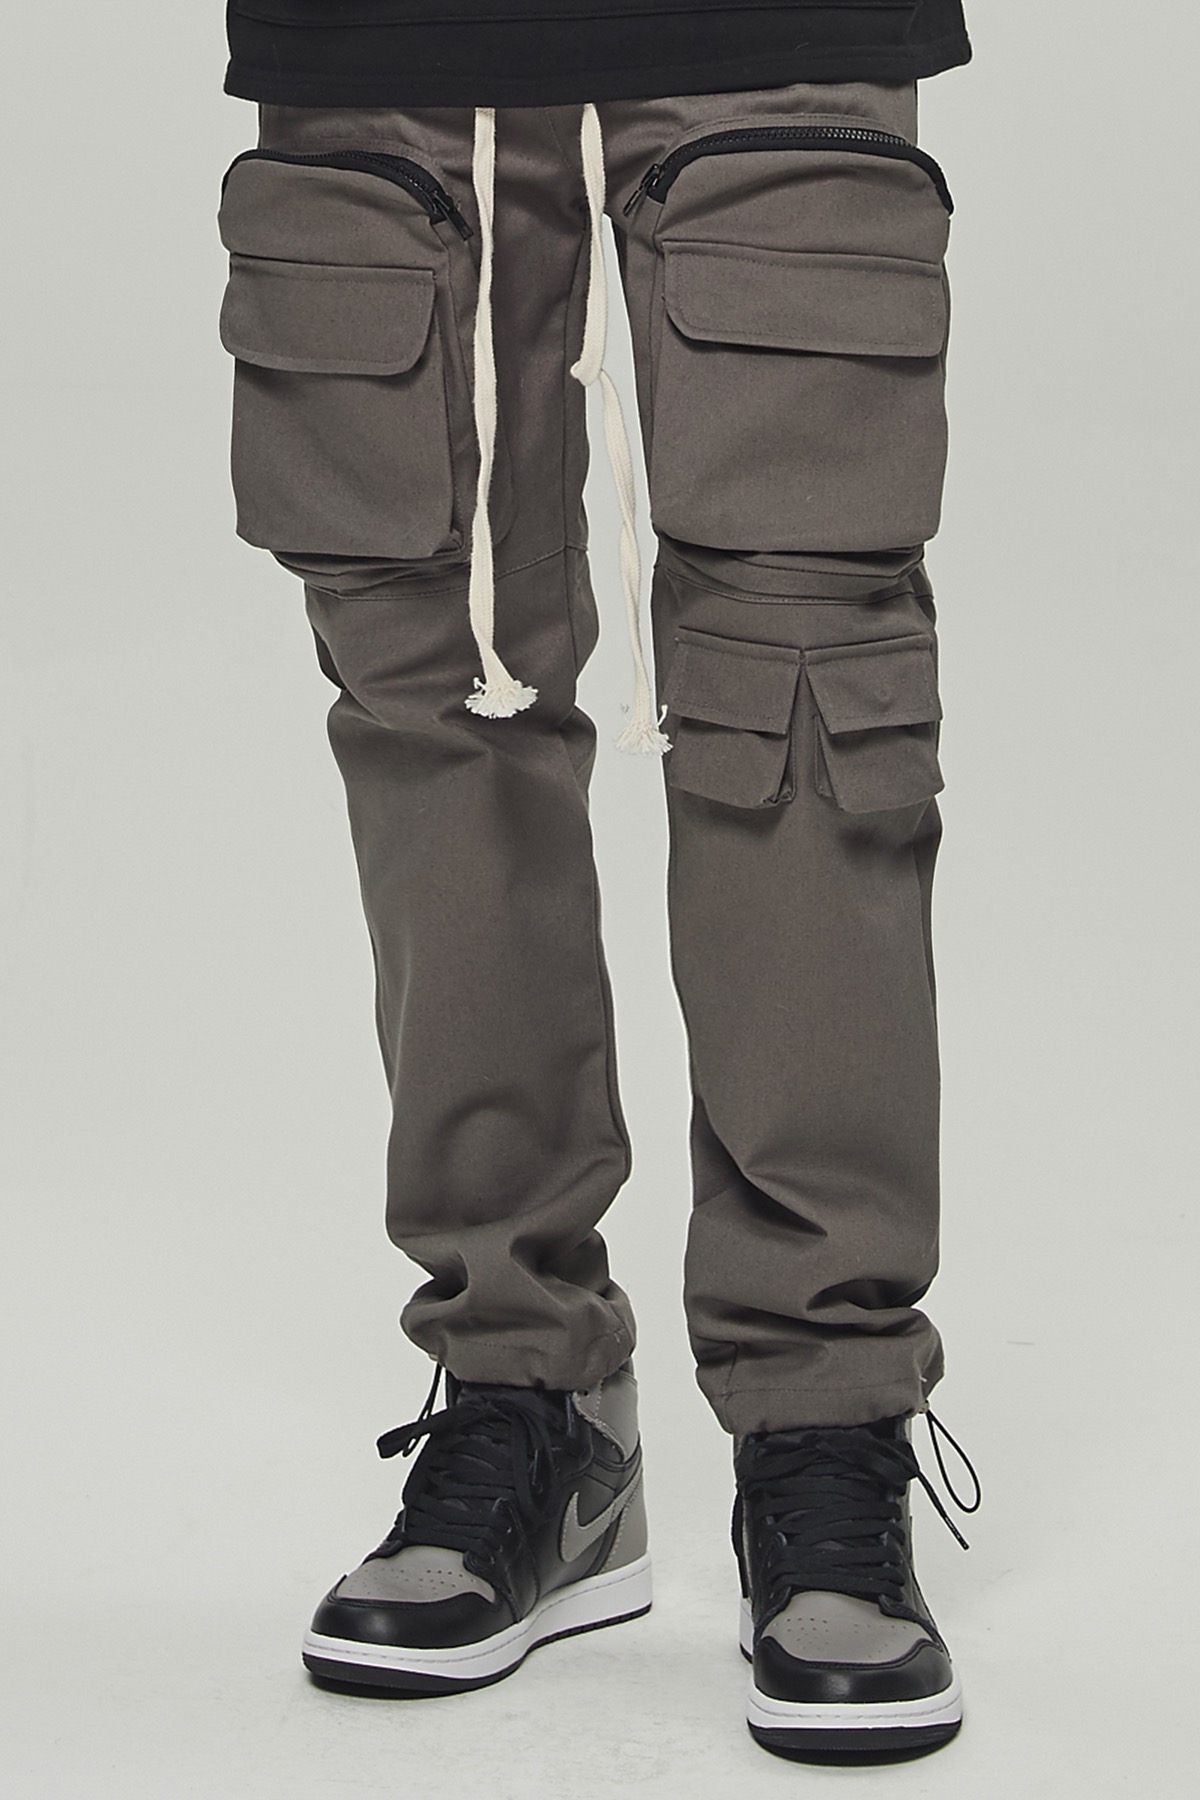 CHARCOAL UTILITY POCKET CARGO STRING PANTS